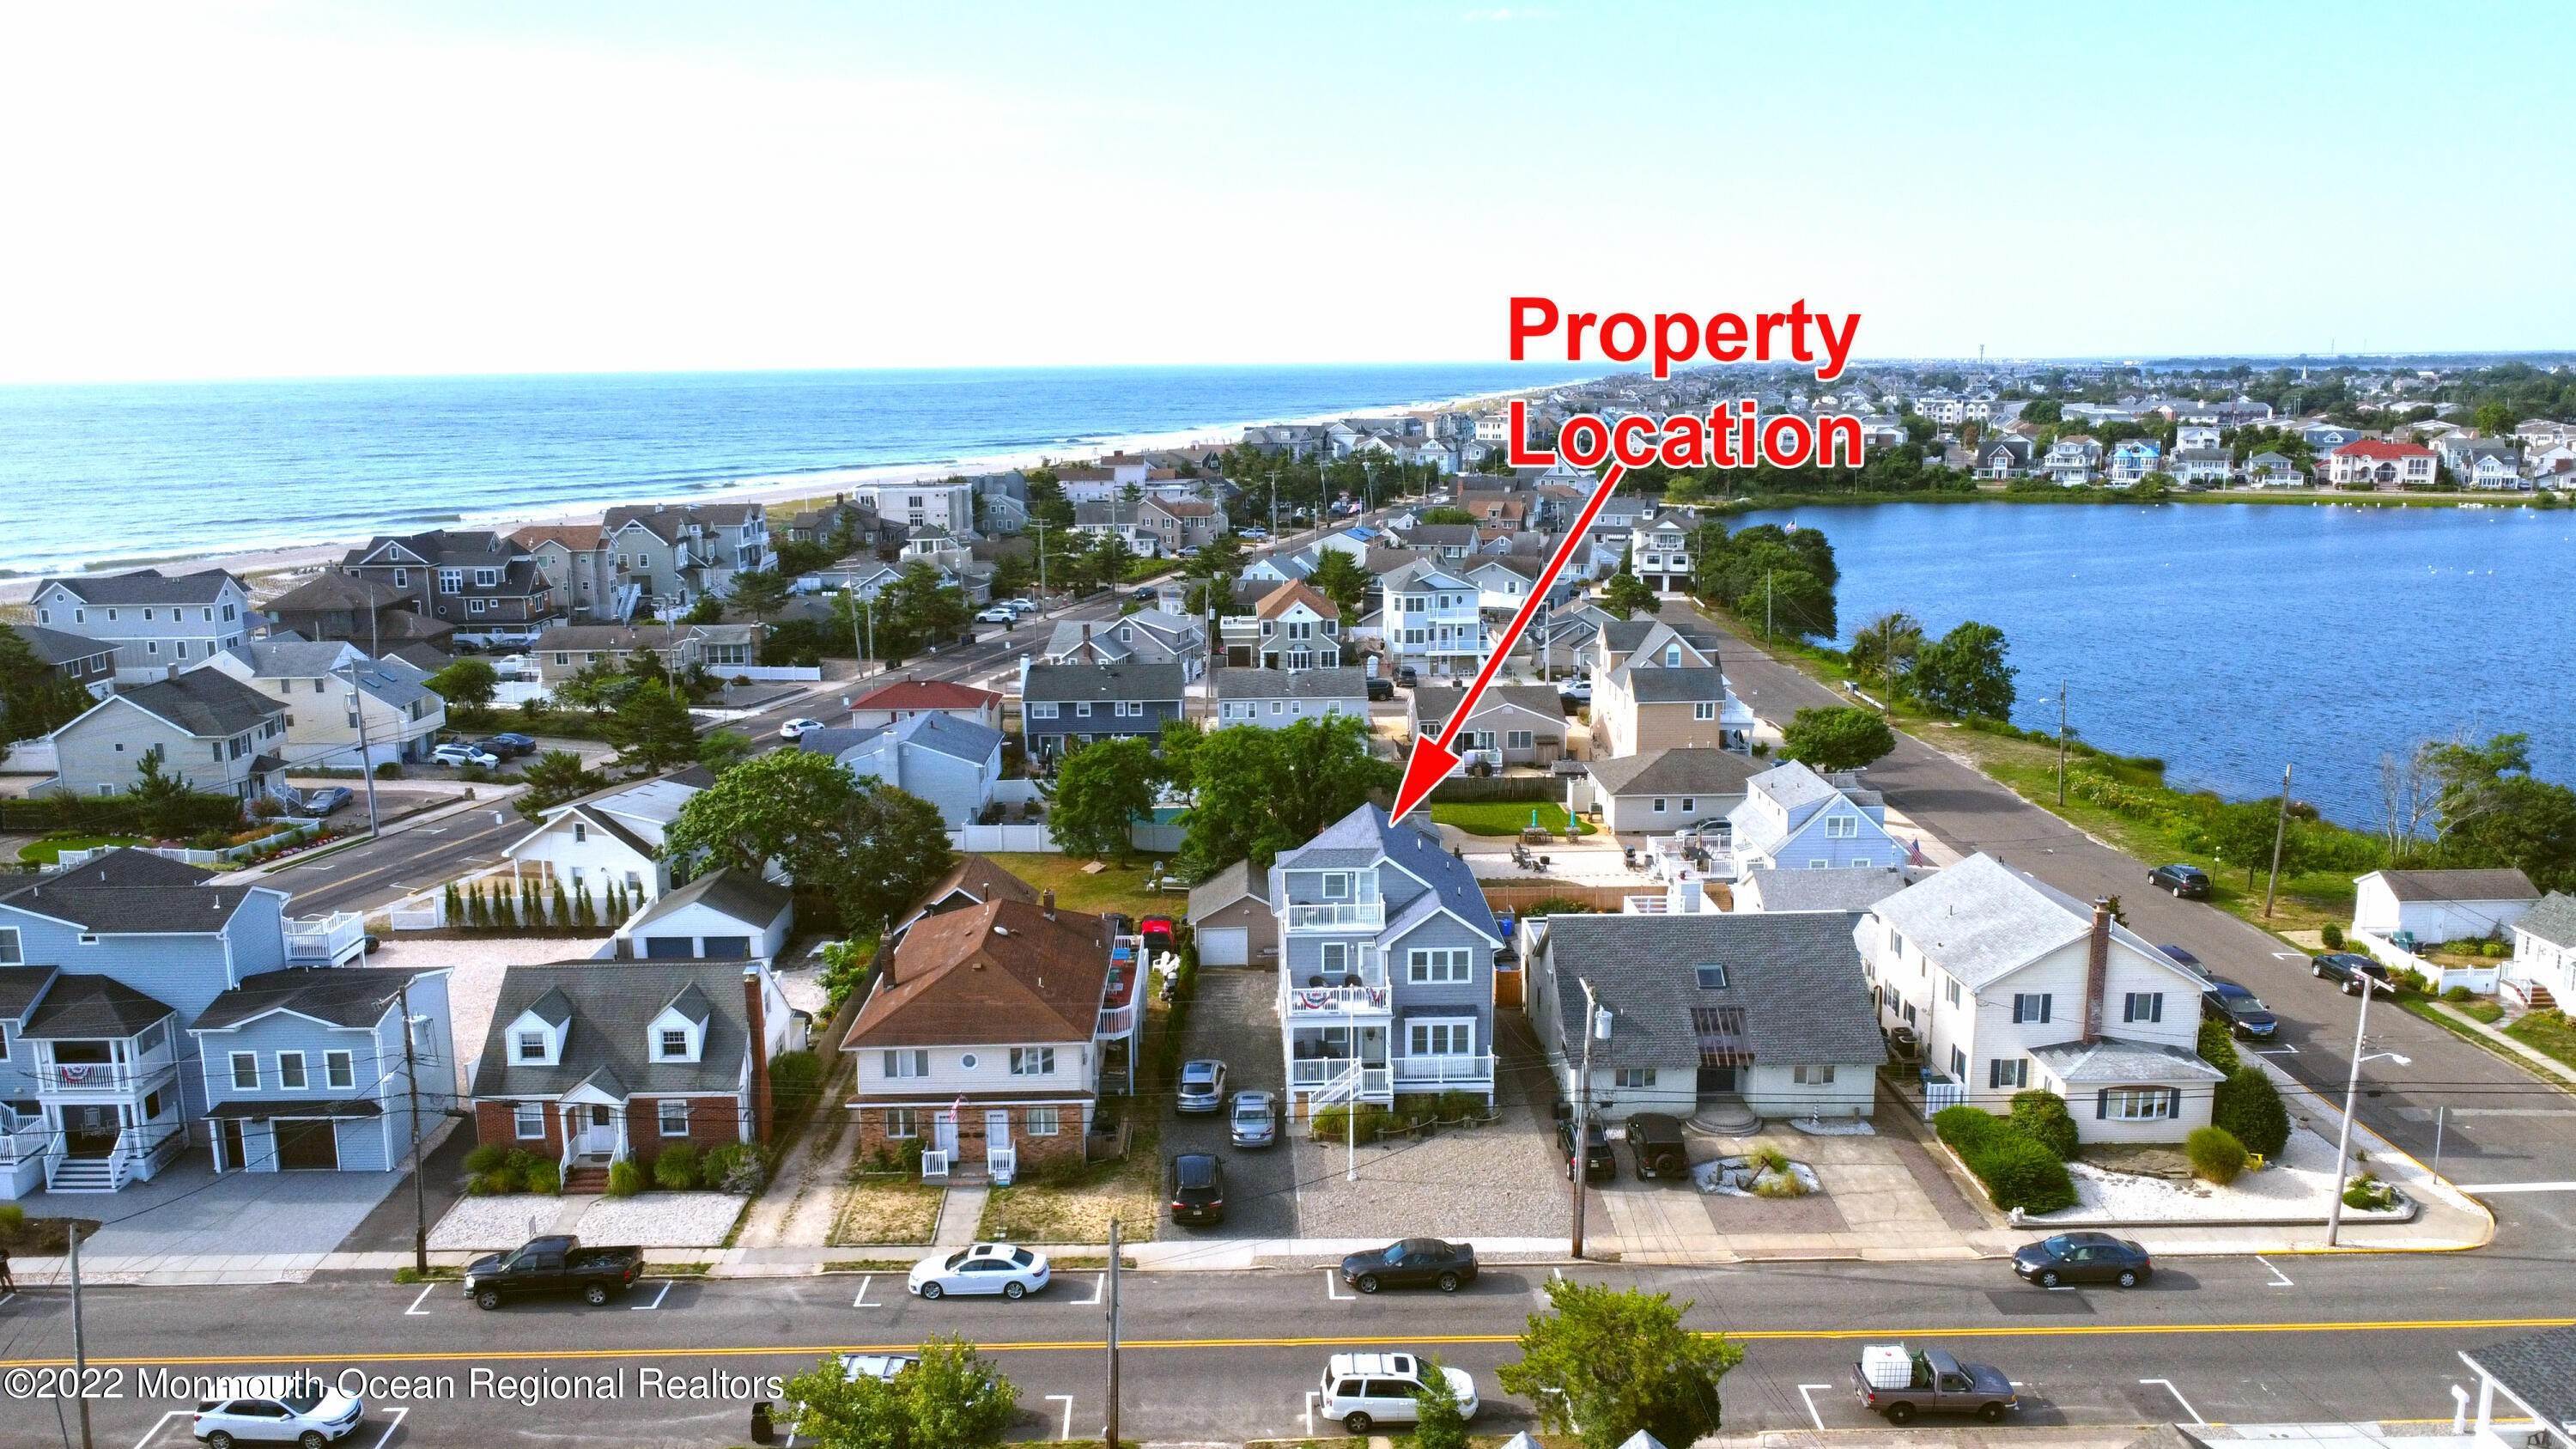 Single Family Homes for Sale at 108 Washington Avenue Point Pleasant Beach, New Jersey 08742 United States